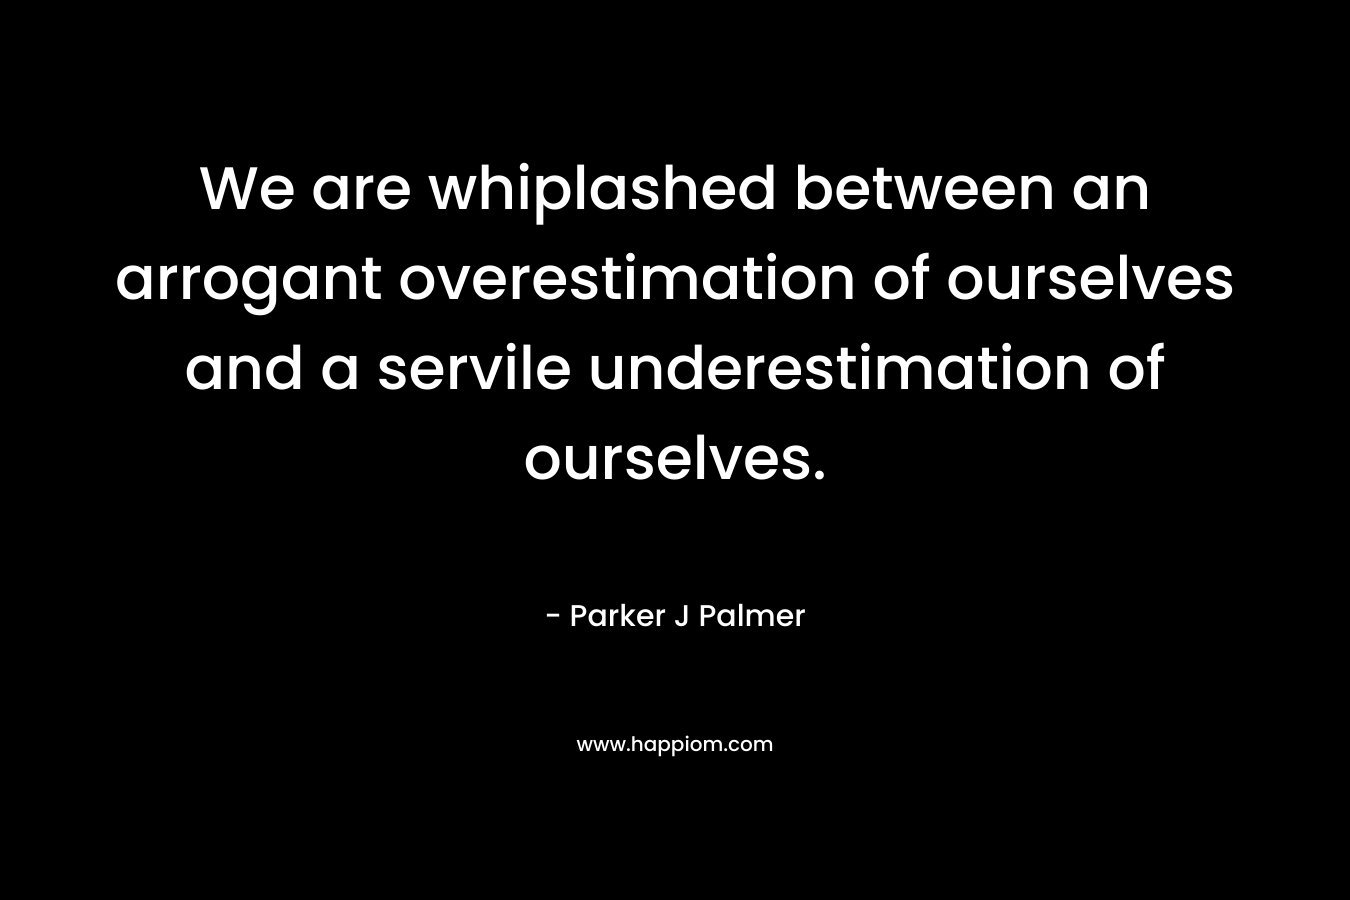 We are whiplashed between an arrogant overestimation of ourselves and a servile underestimation of ourselves. – Parker J Palmer